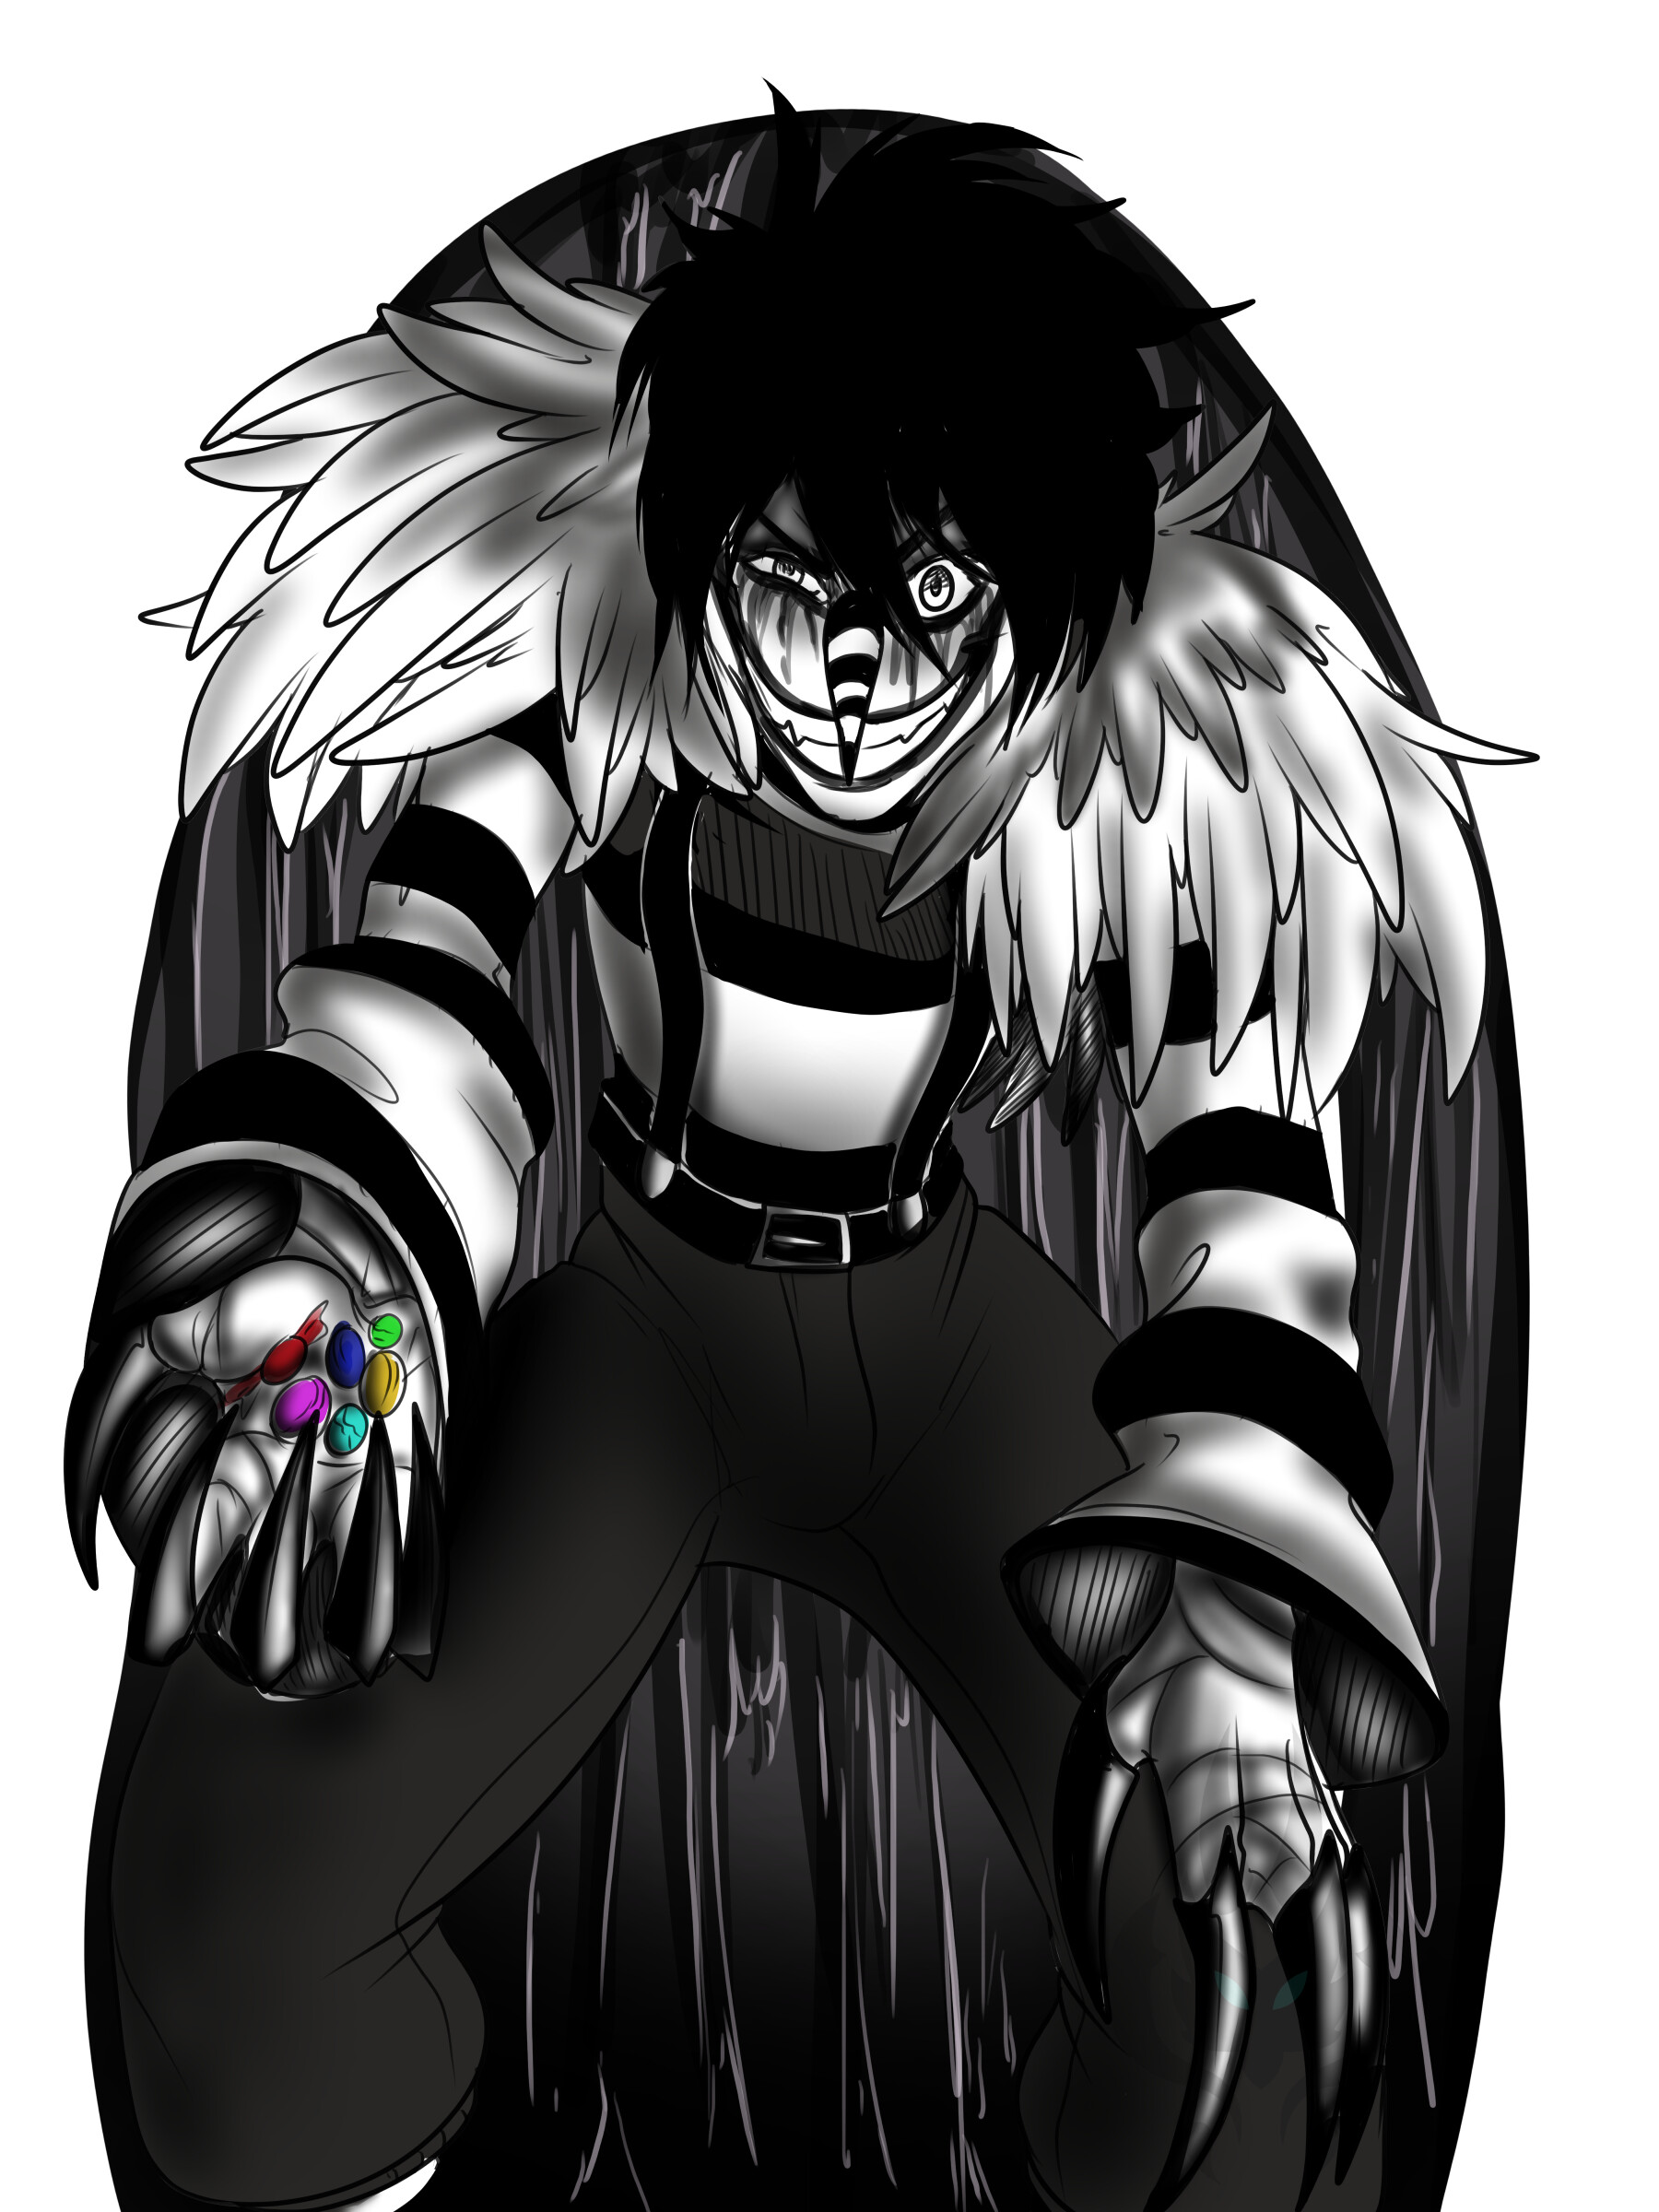 Gift art for a friend with a creepypasta character called Laughing Jack. 